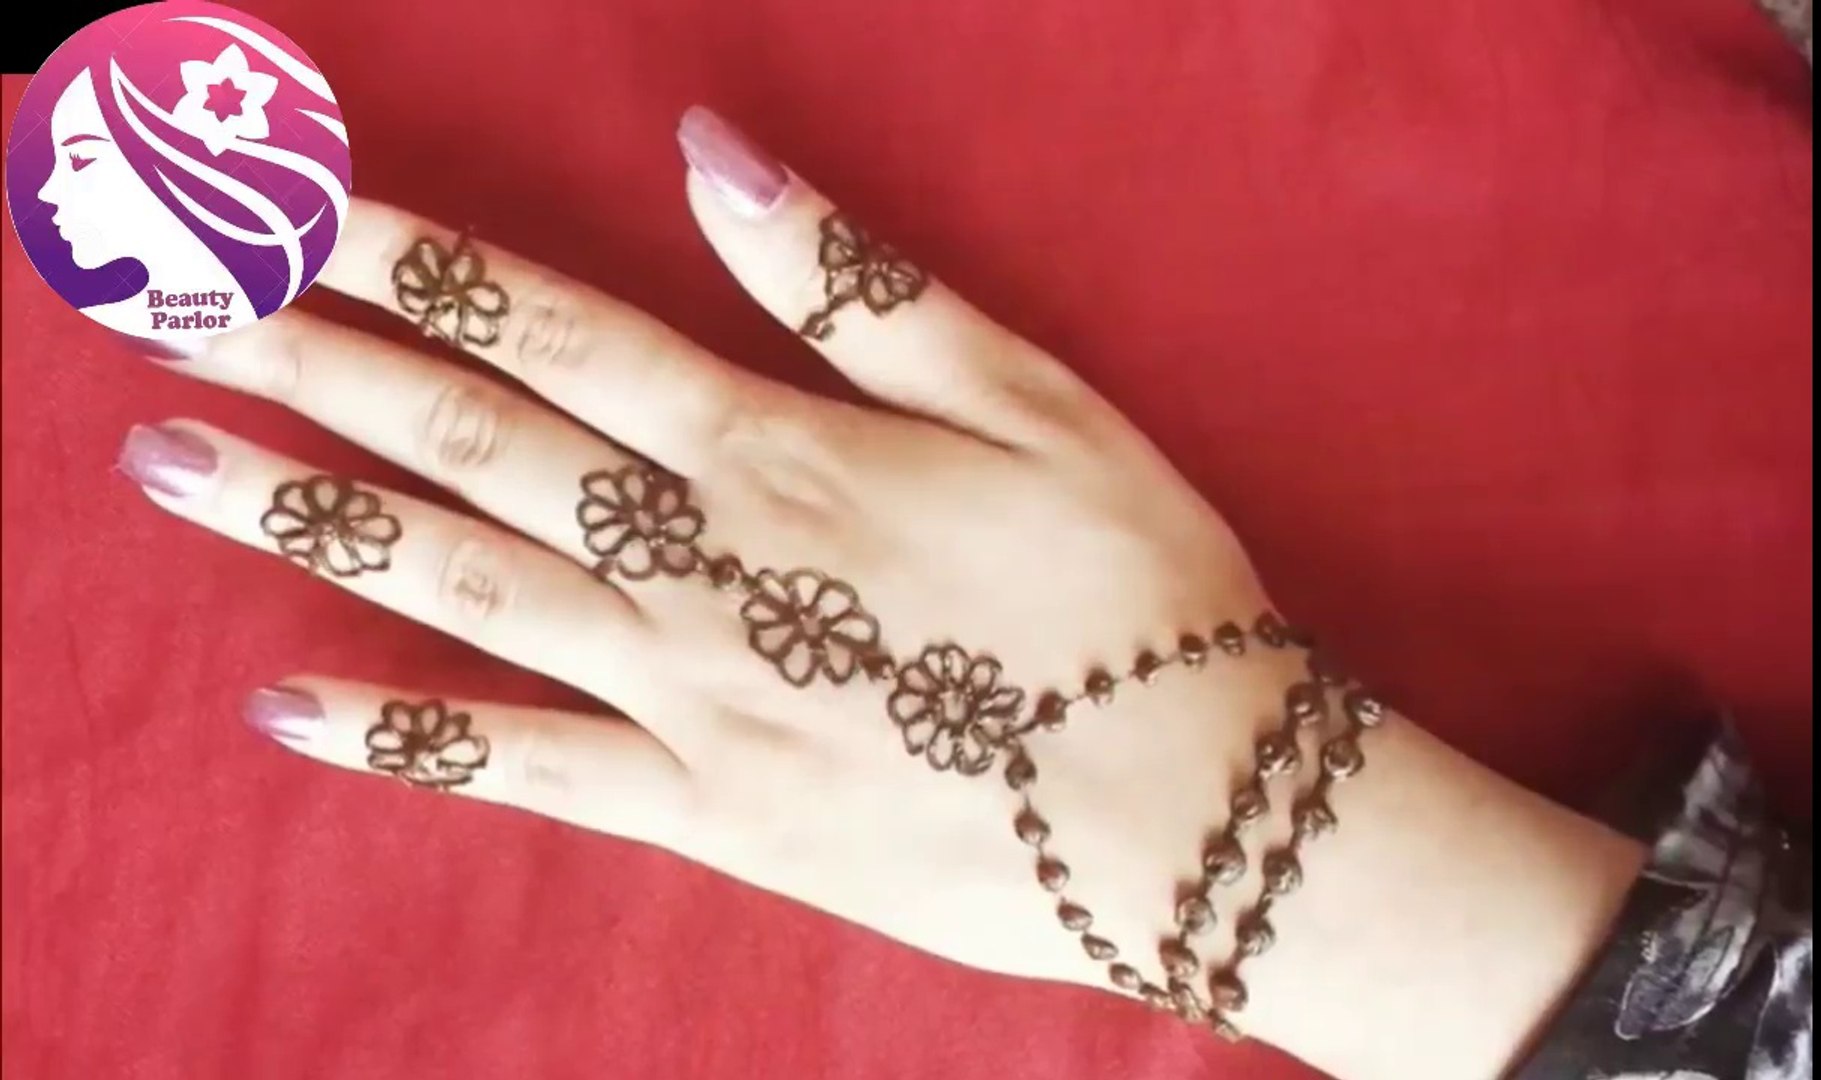 Floral Mehndi Designs Simple And Easy Step By Step For Hands Episode 104 By Art Institute Video Dailymotion